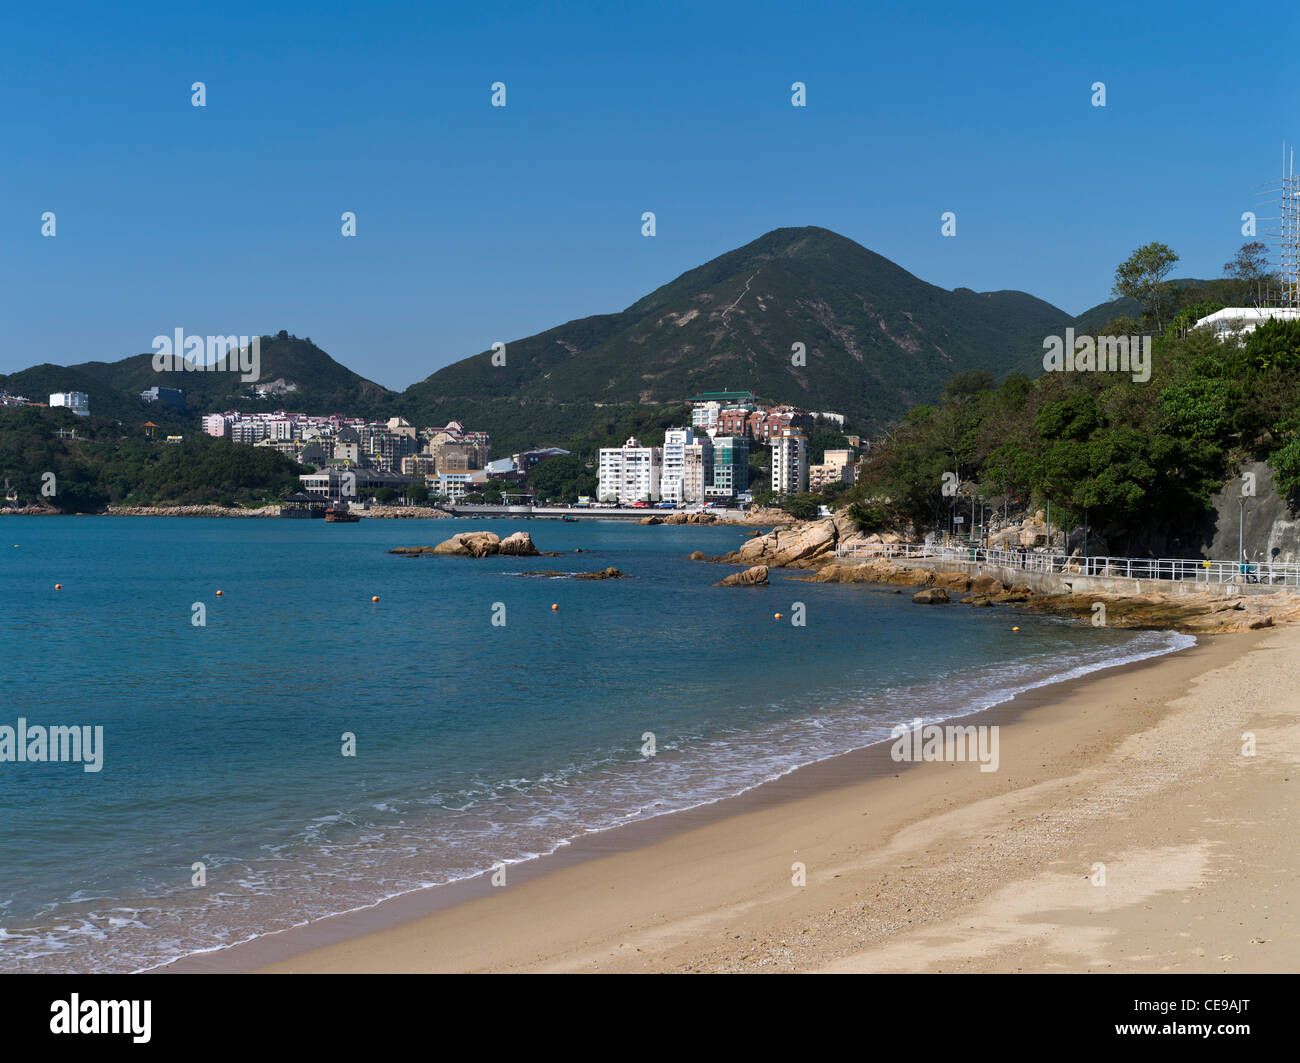 Dh St Stephens Bay Beach STANLEY HONG KONG Stanley Bay invernale di sabbia dell'isola Foto Stock